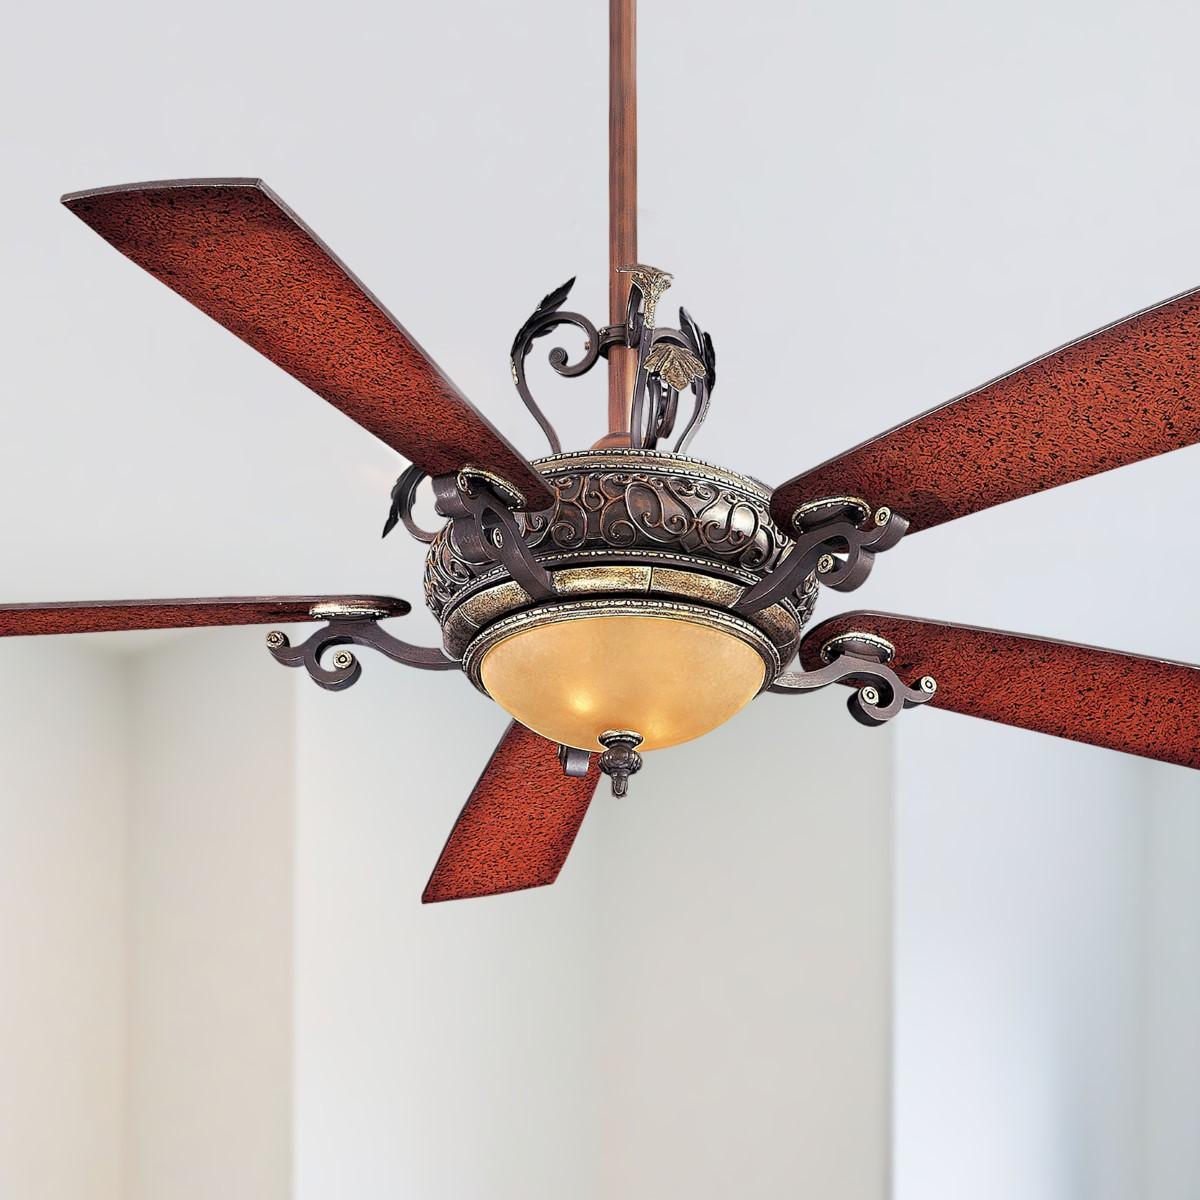 Napoli 56 Inch Ceiling Fan With Light, Sterling Walnut Finish, Wall Control Included - Bees Lighting